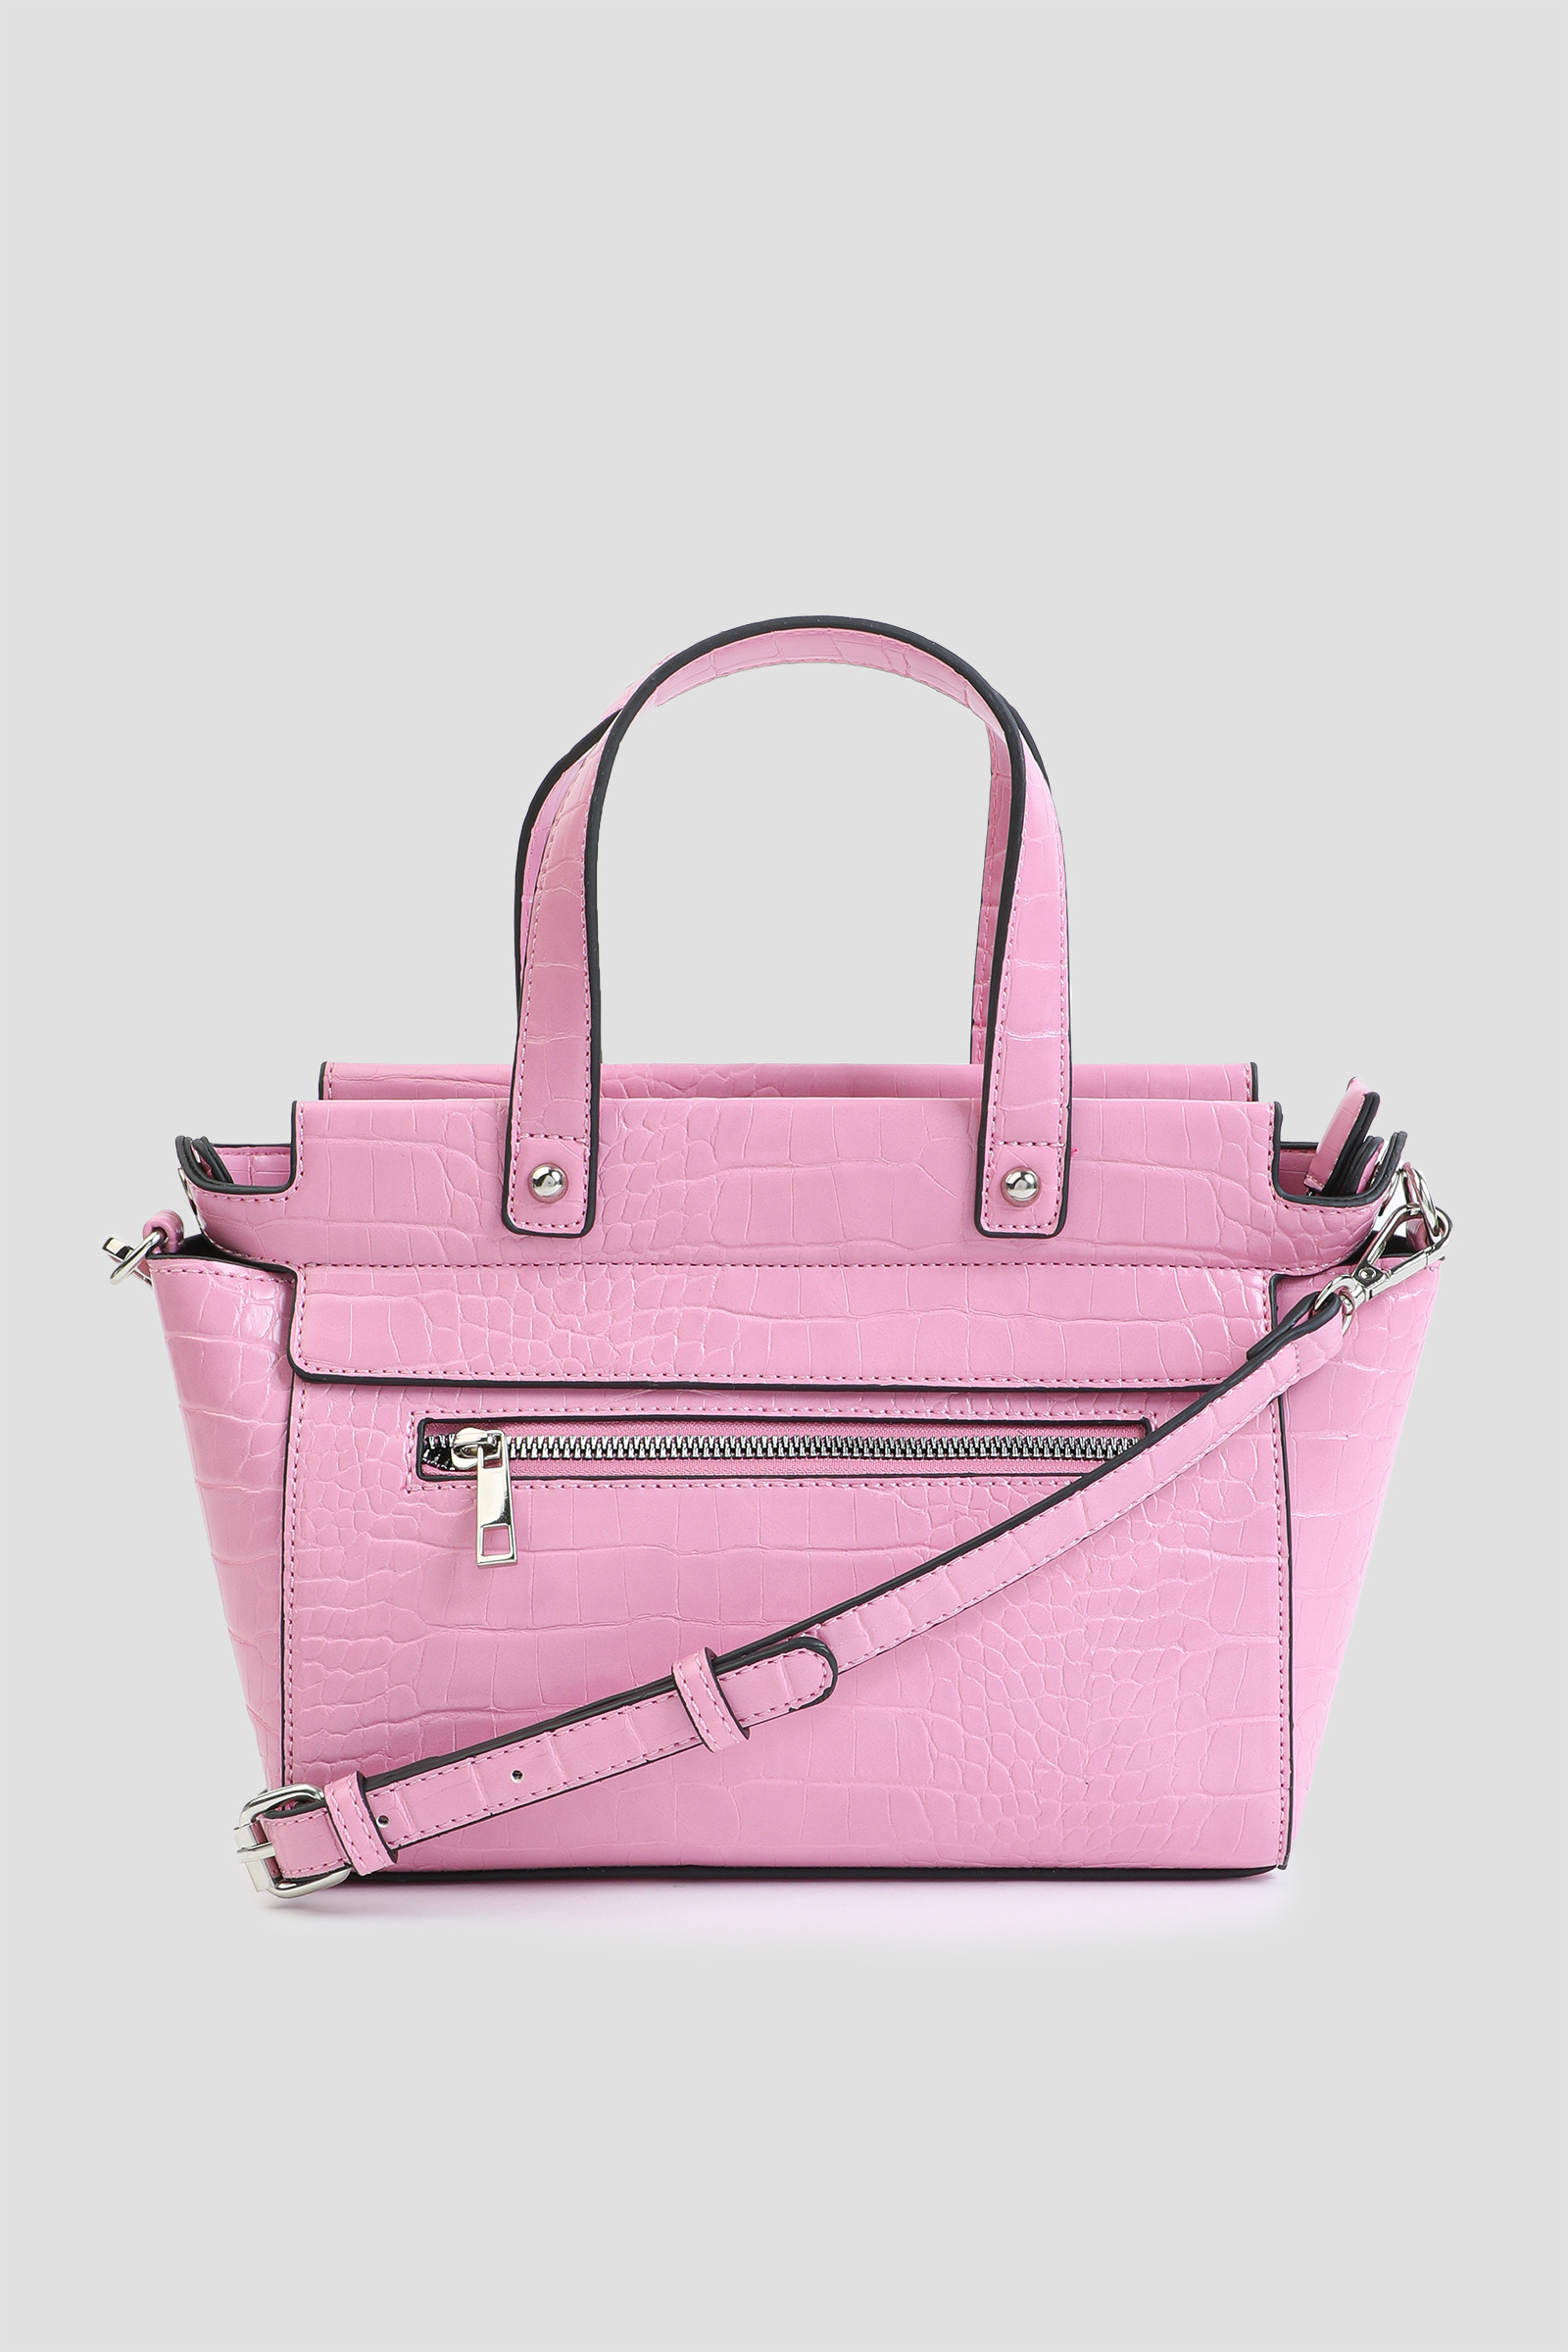 Ardene Tote Bag with Top Handles and Crossbody Strap in Light Pink | Faux Leather/Polyester